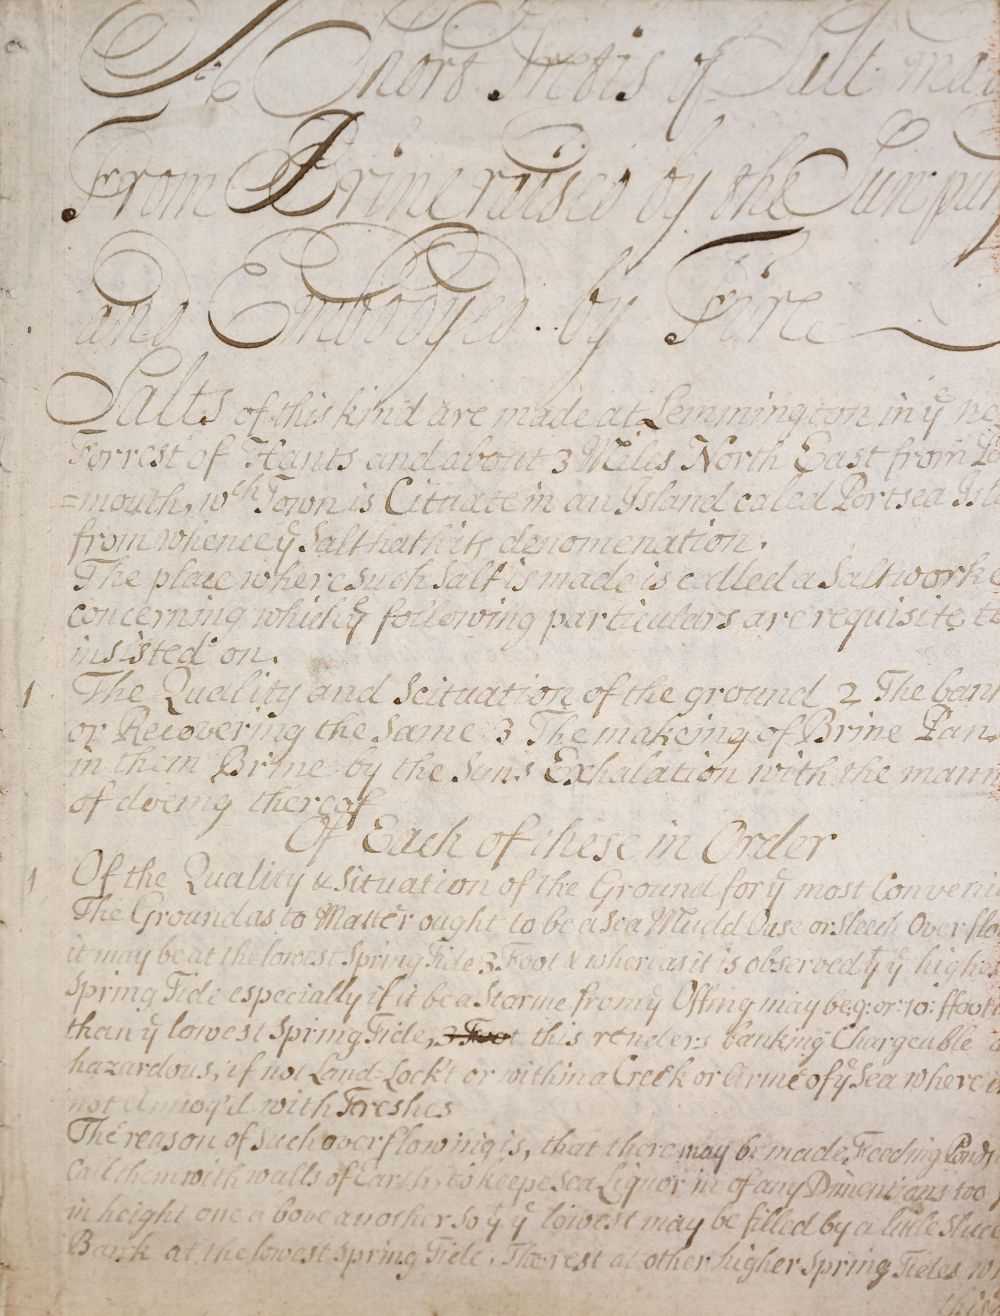 Lot 240 - Salt processing. 'A short tretis of salt mad[e] from brine raised by the sun pan', 1725